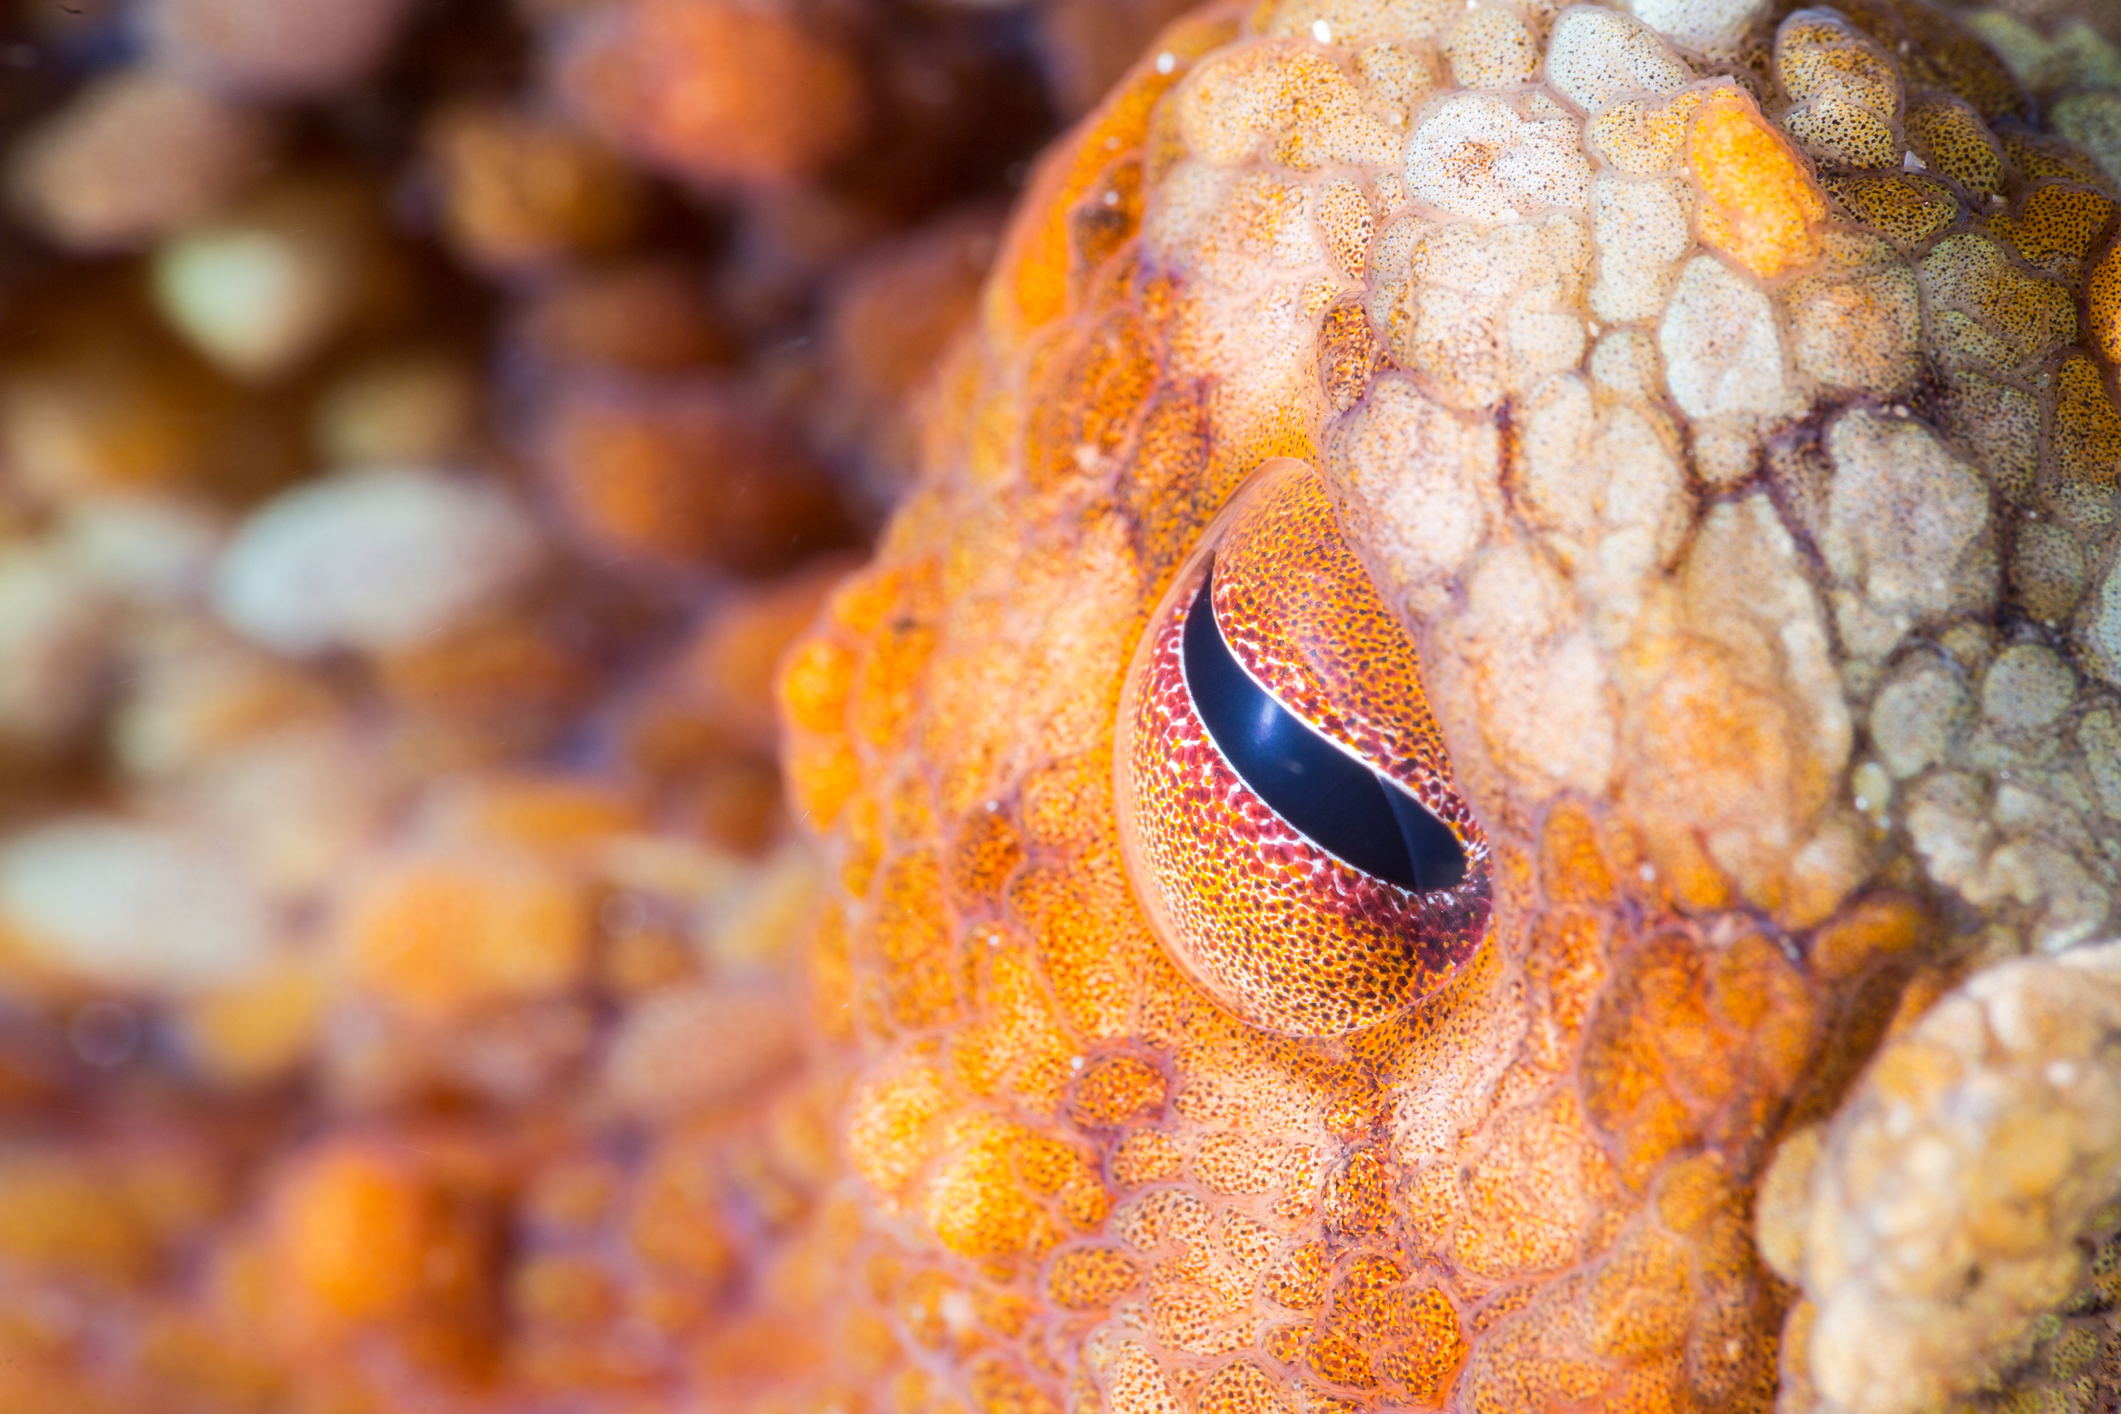 Underwater macro photo of a two-spot octopus eye (Octopus bimaculoides) at Catalina Island, California.